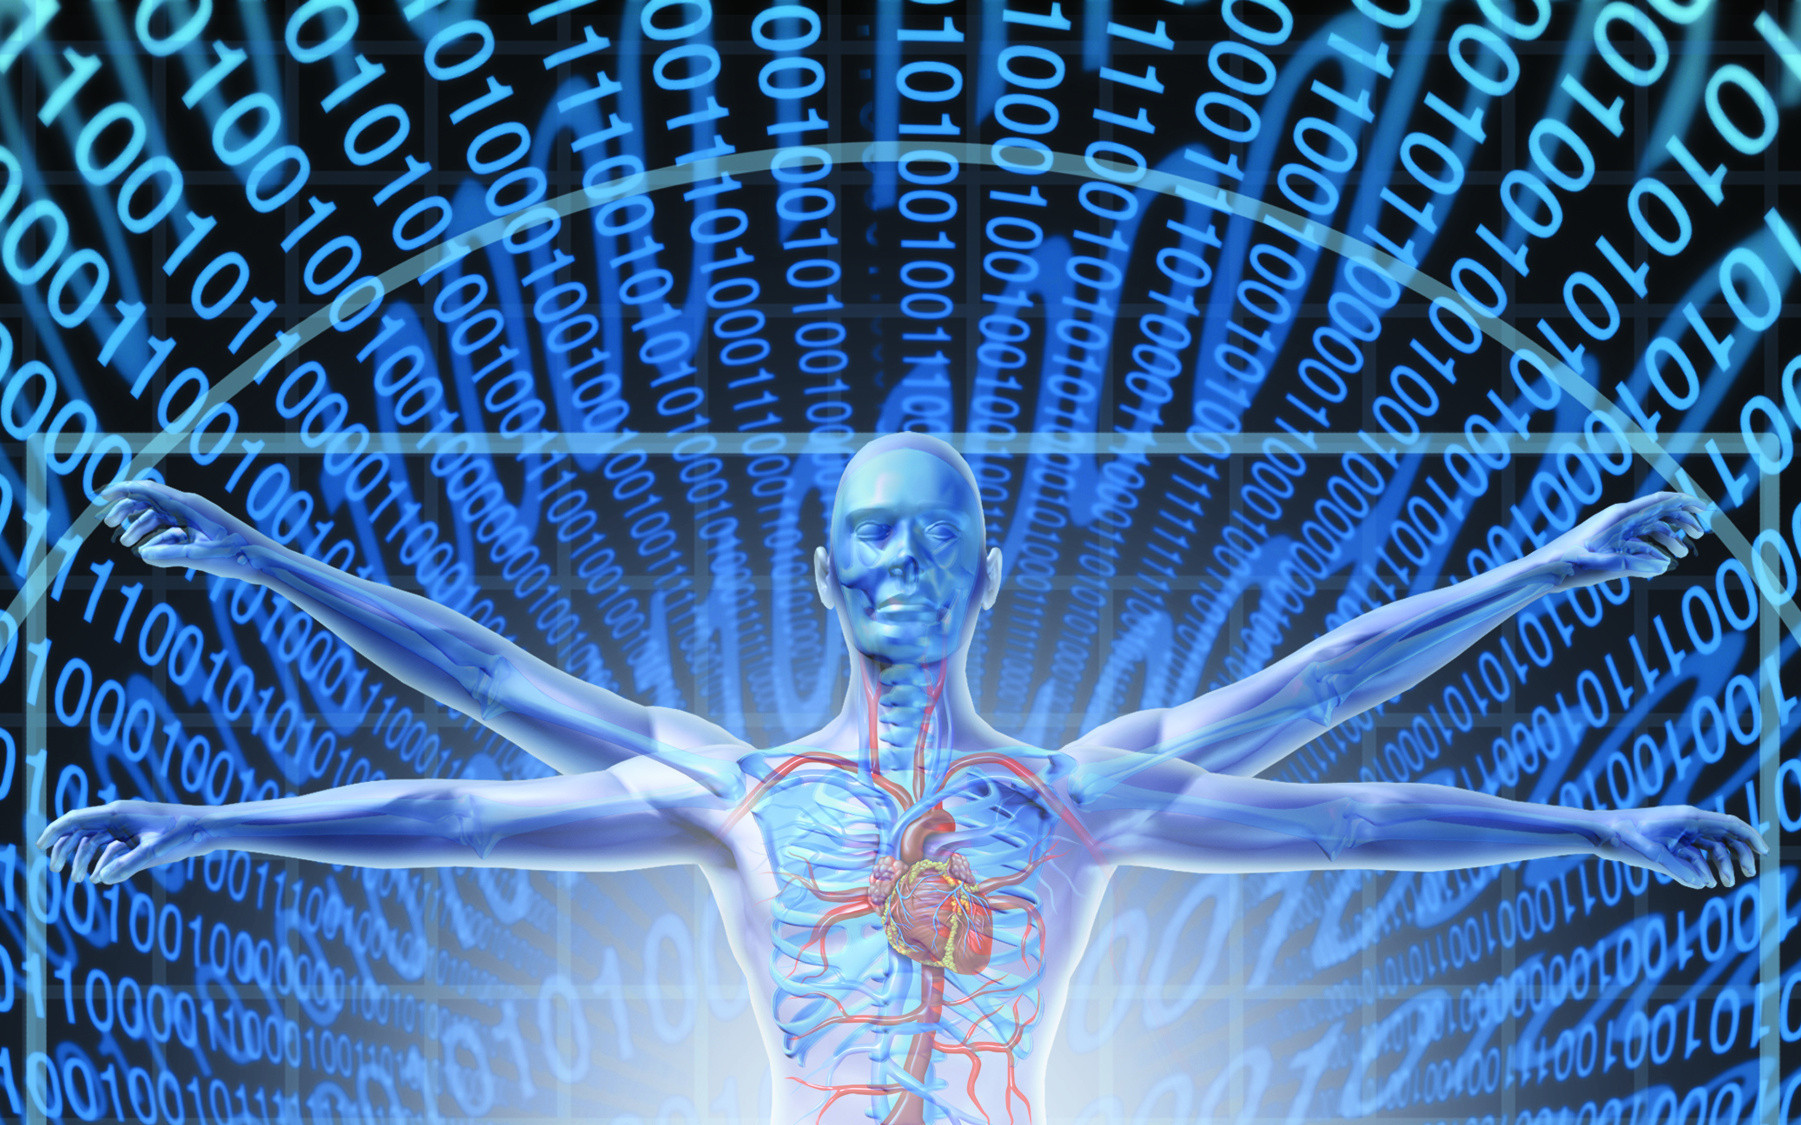 Medical Records Technology with a vitruvian man over a background of digital binary code as a health care symbol of electronic data storage at a central server network available in the cloud for a hospital or clinic patient convenience.